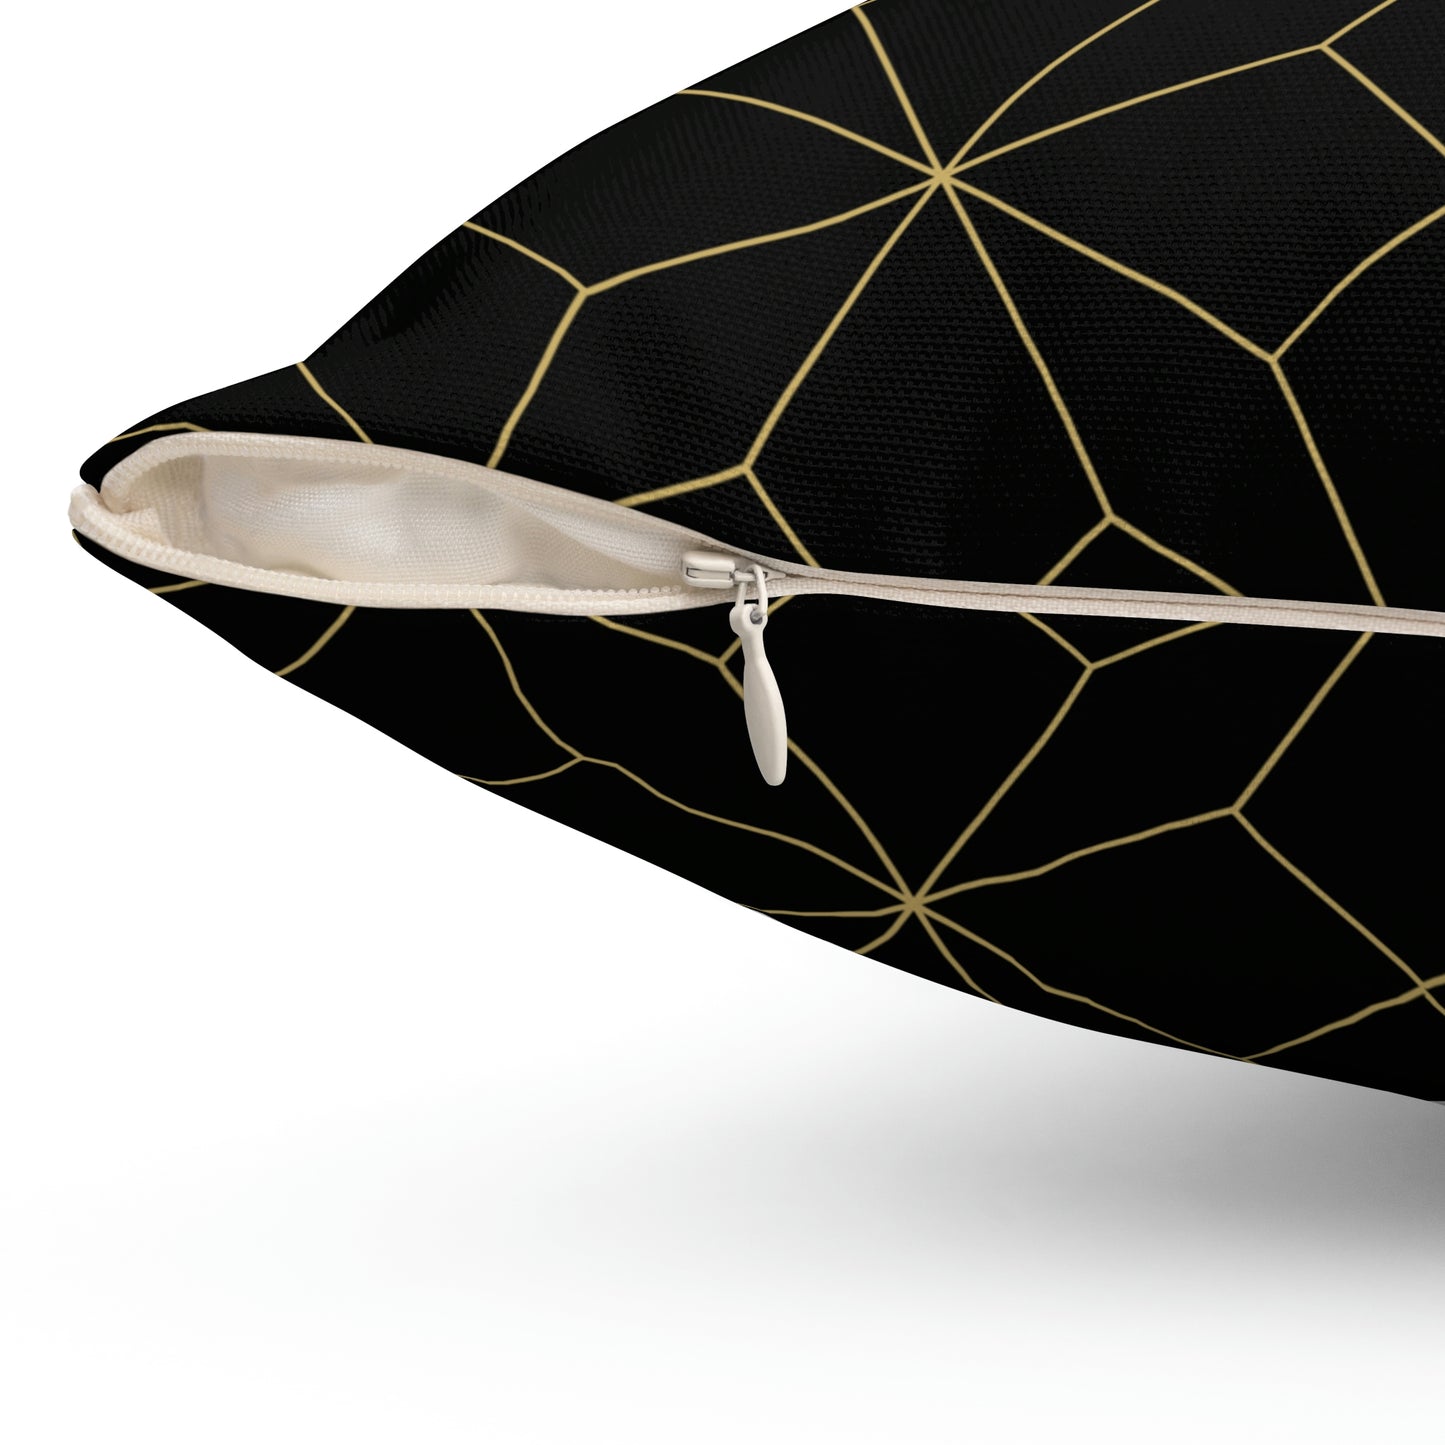 Geometric Gold and Black Pillow Cover